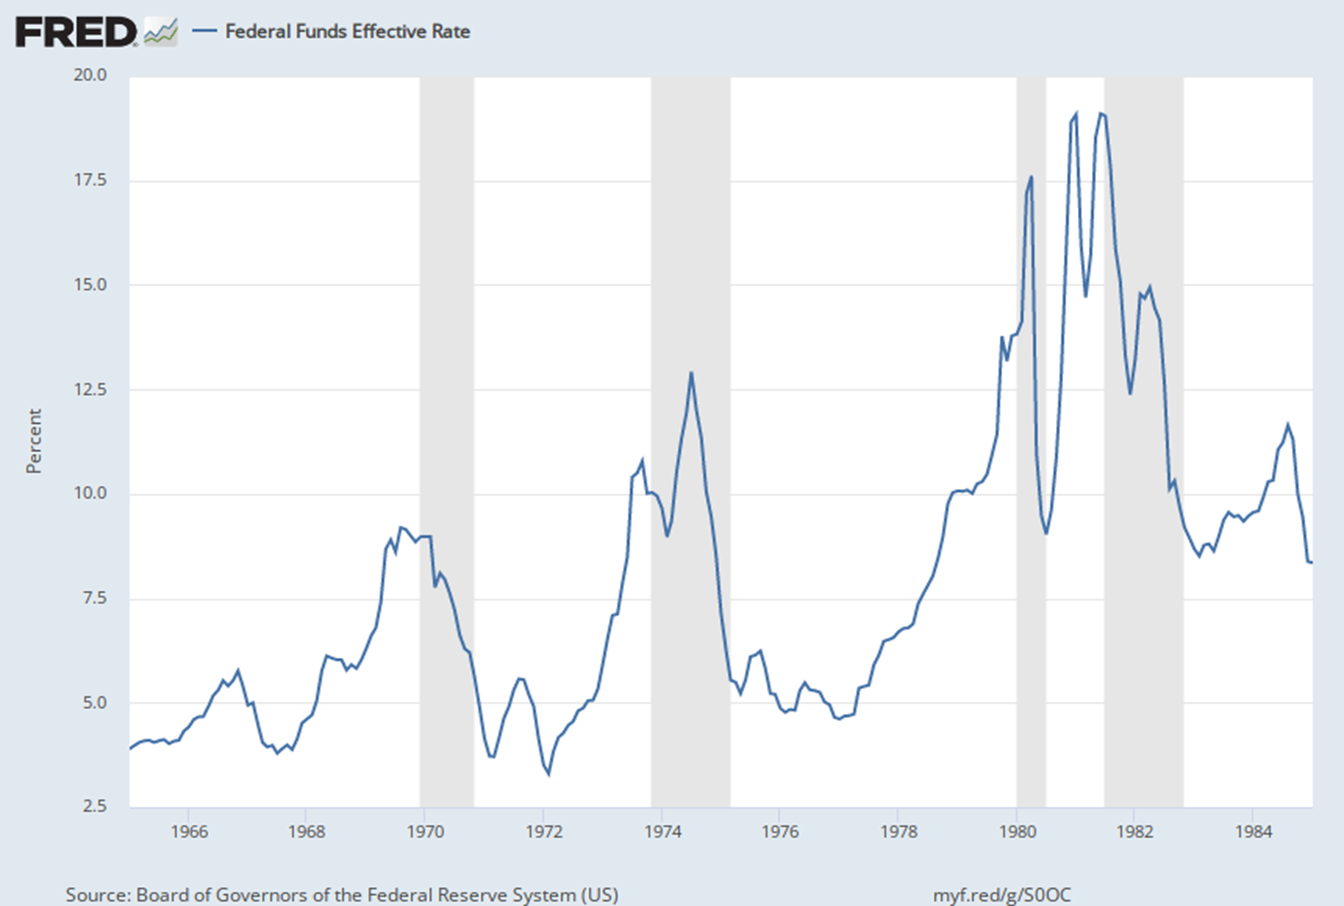 Chart showing Federal Reserve interest rates between 1960 and 1985